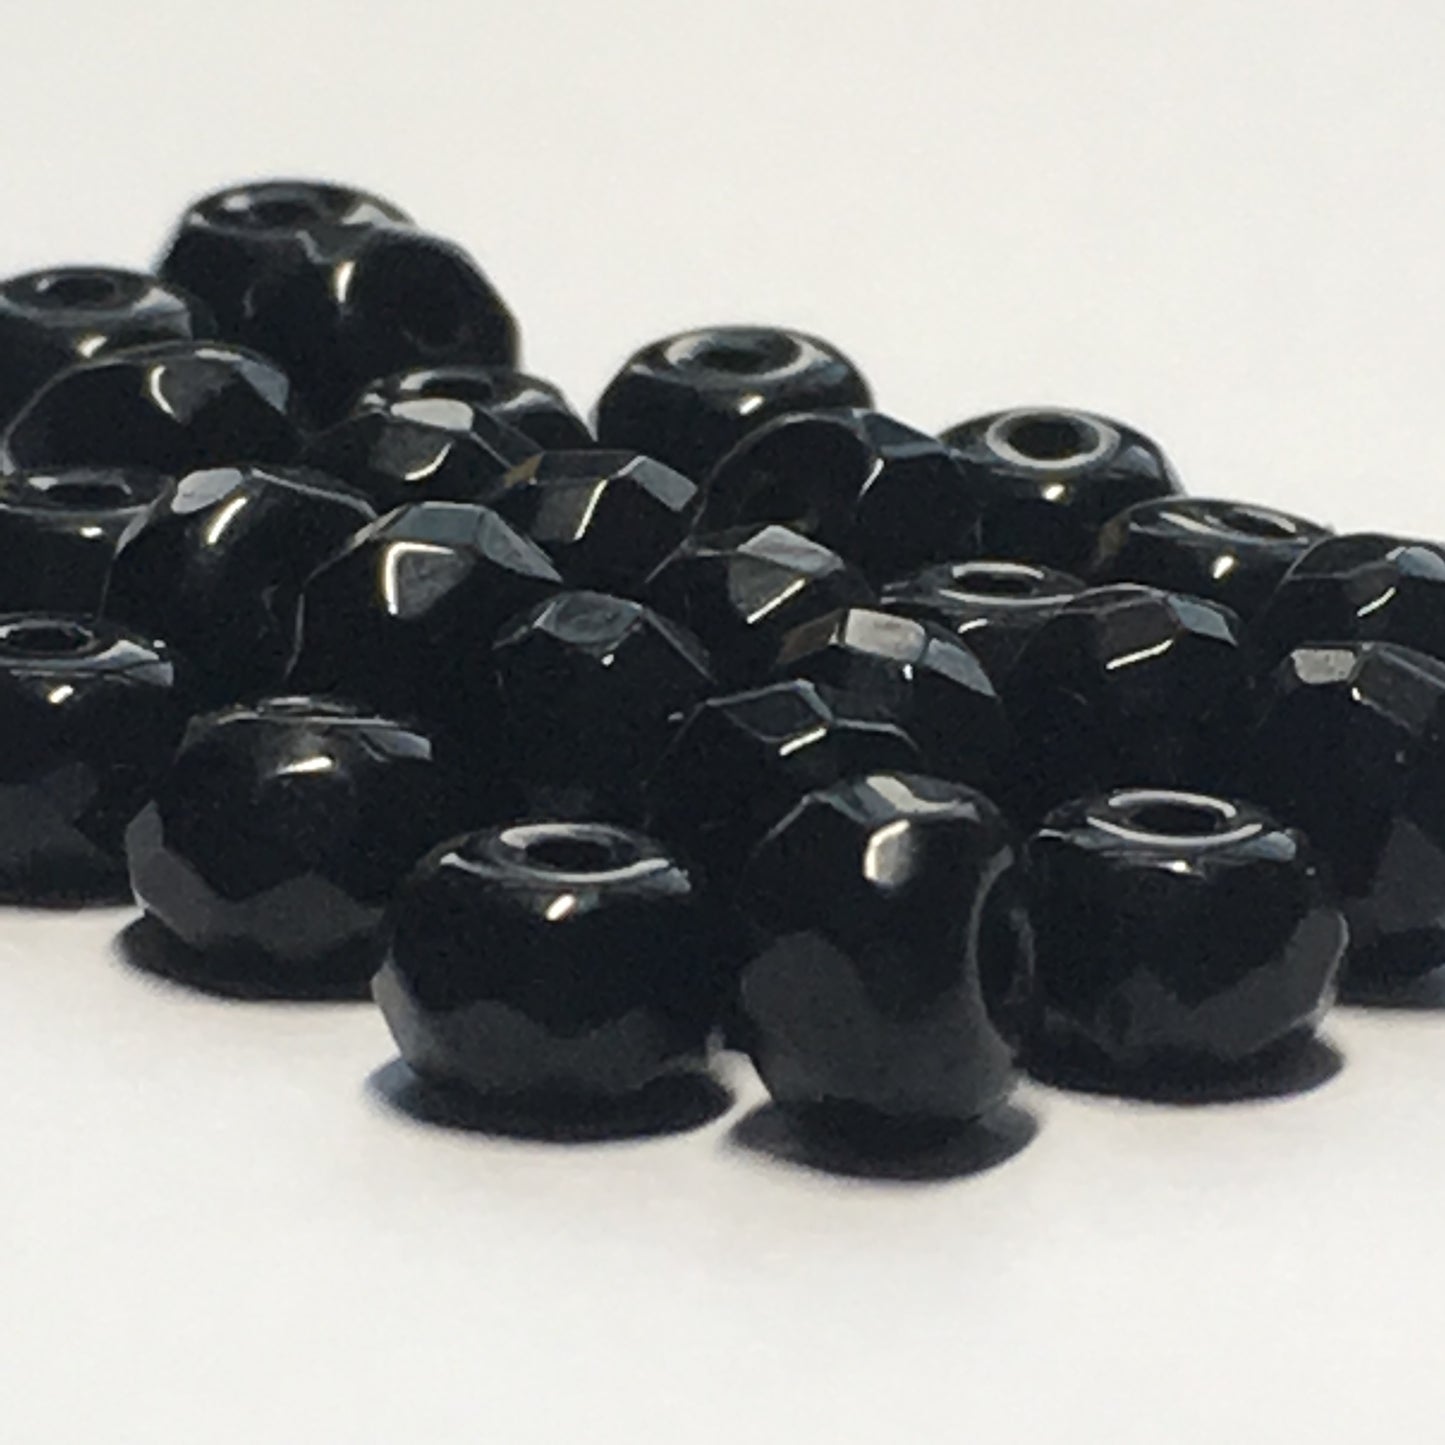 Opaque Black Faceted Rondelle Glass Beads, 4 x 6 mm, 30 Beads